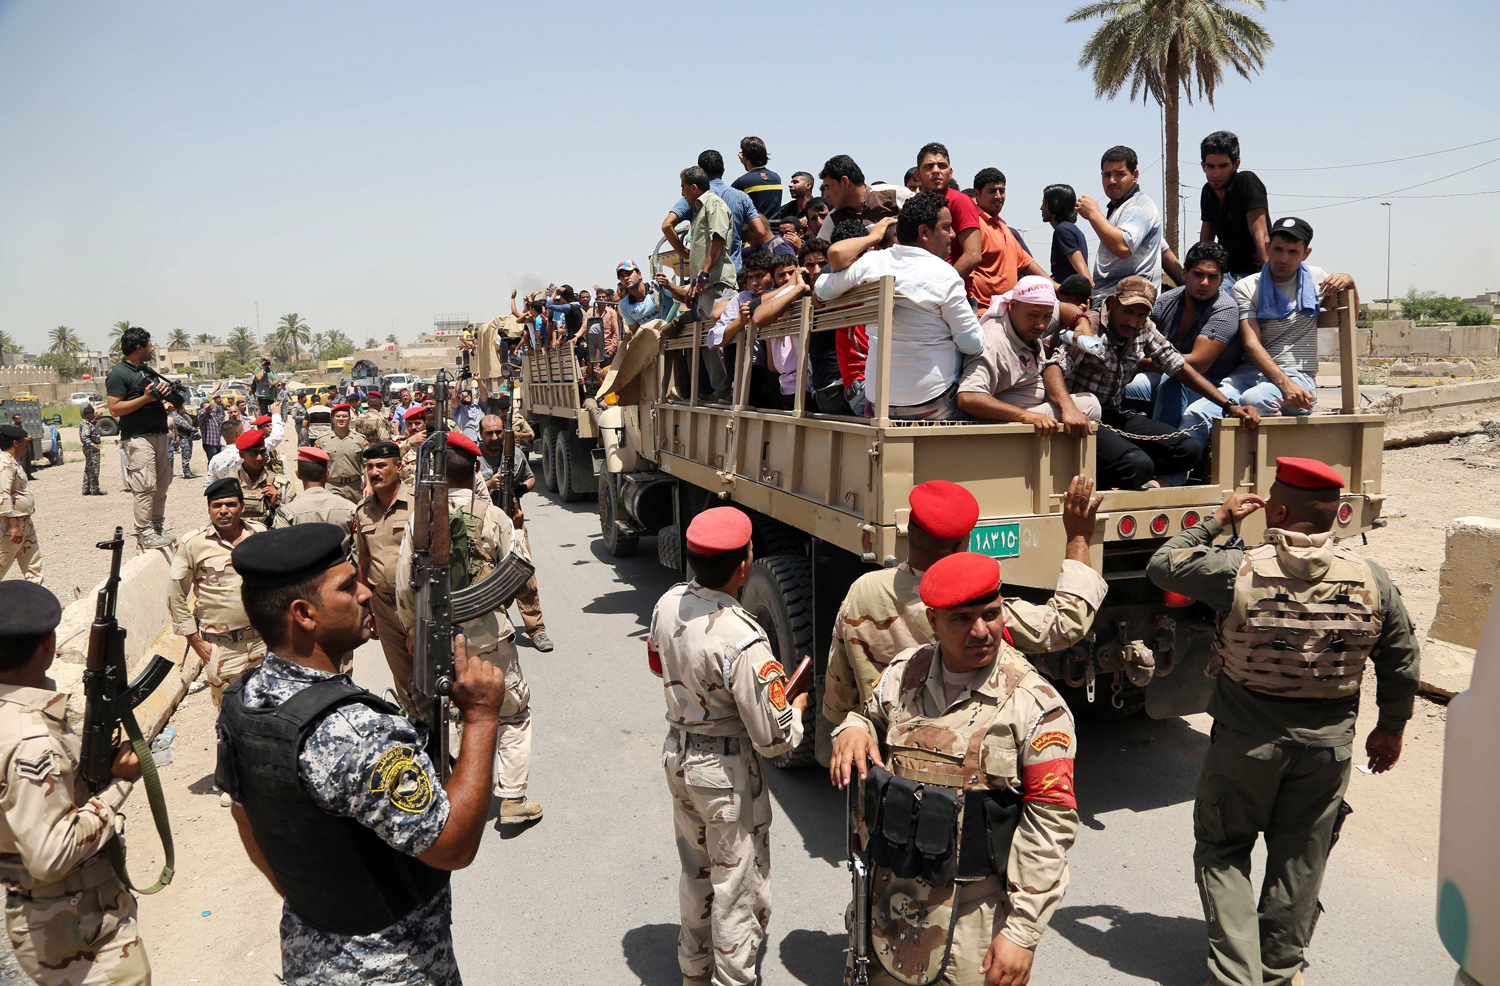 Iraqi men board military trucks to join the Iraqi army at the main recruiting center in Baghdad on June 14, after authorities urged Iraqis to help battle insurgents.